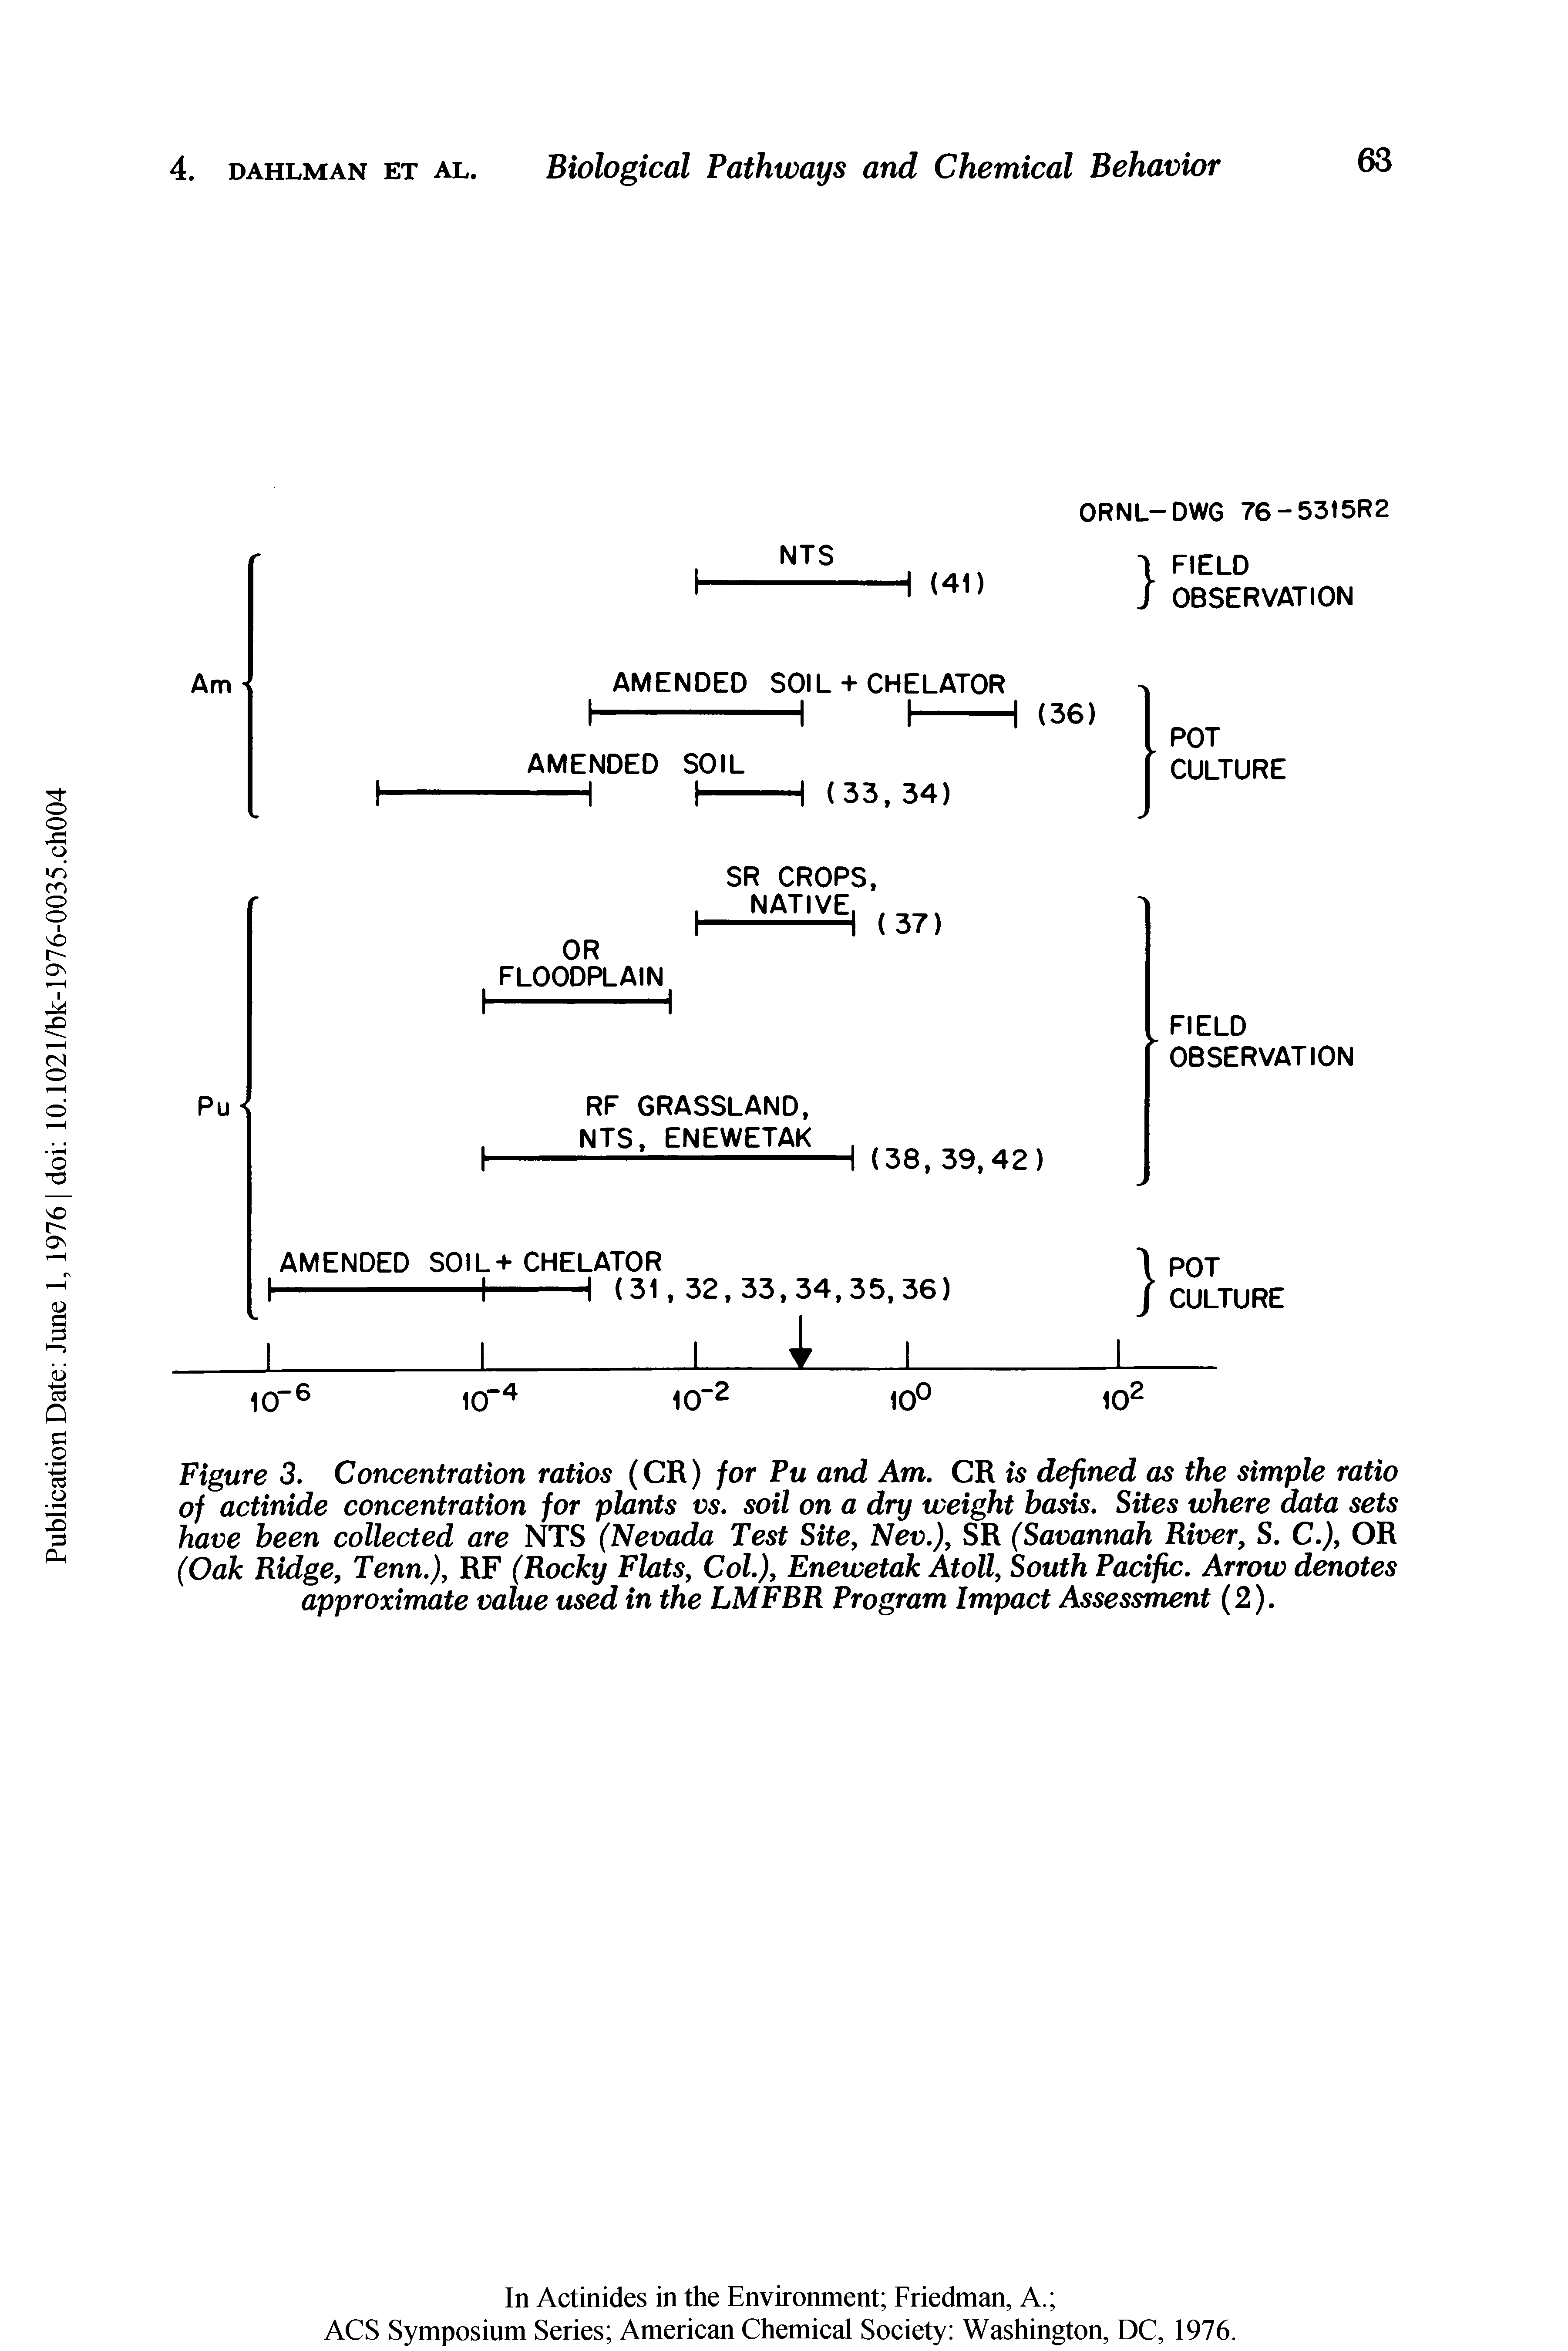 Figure 3. Concentration ratios (CR) for Pu and Am. CR is defined as the simple ratio of actinide concentration for plants vs. soil on a dry weight basis. Sites where data sets have been collected are NTS (Nevada Test Site, Nev.), SR (Savannah River, S. C.), OR (Oak Ridge, Tenn.), RF (Rocky Flats, Col.), Enewetak Atoll, South Pacific. Arrow denotes approximate value used in the LMFBR Program Impact Assessment (2).